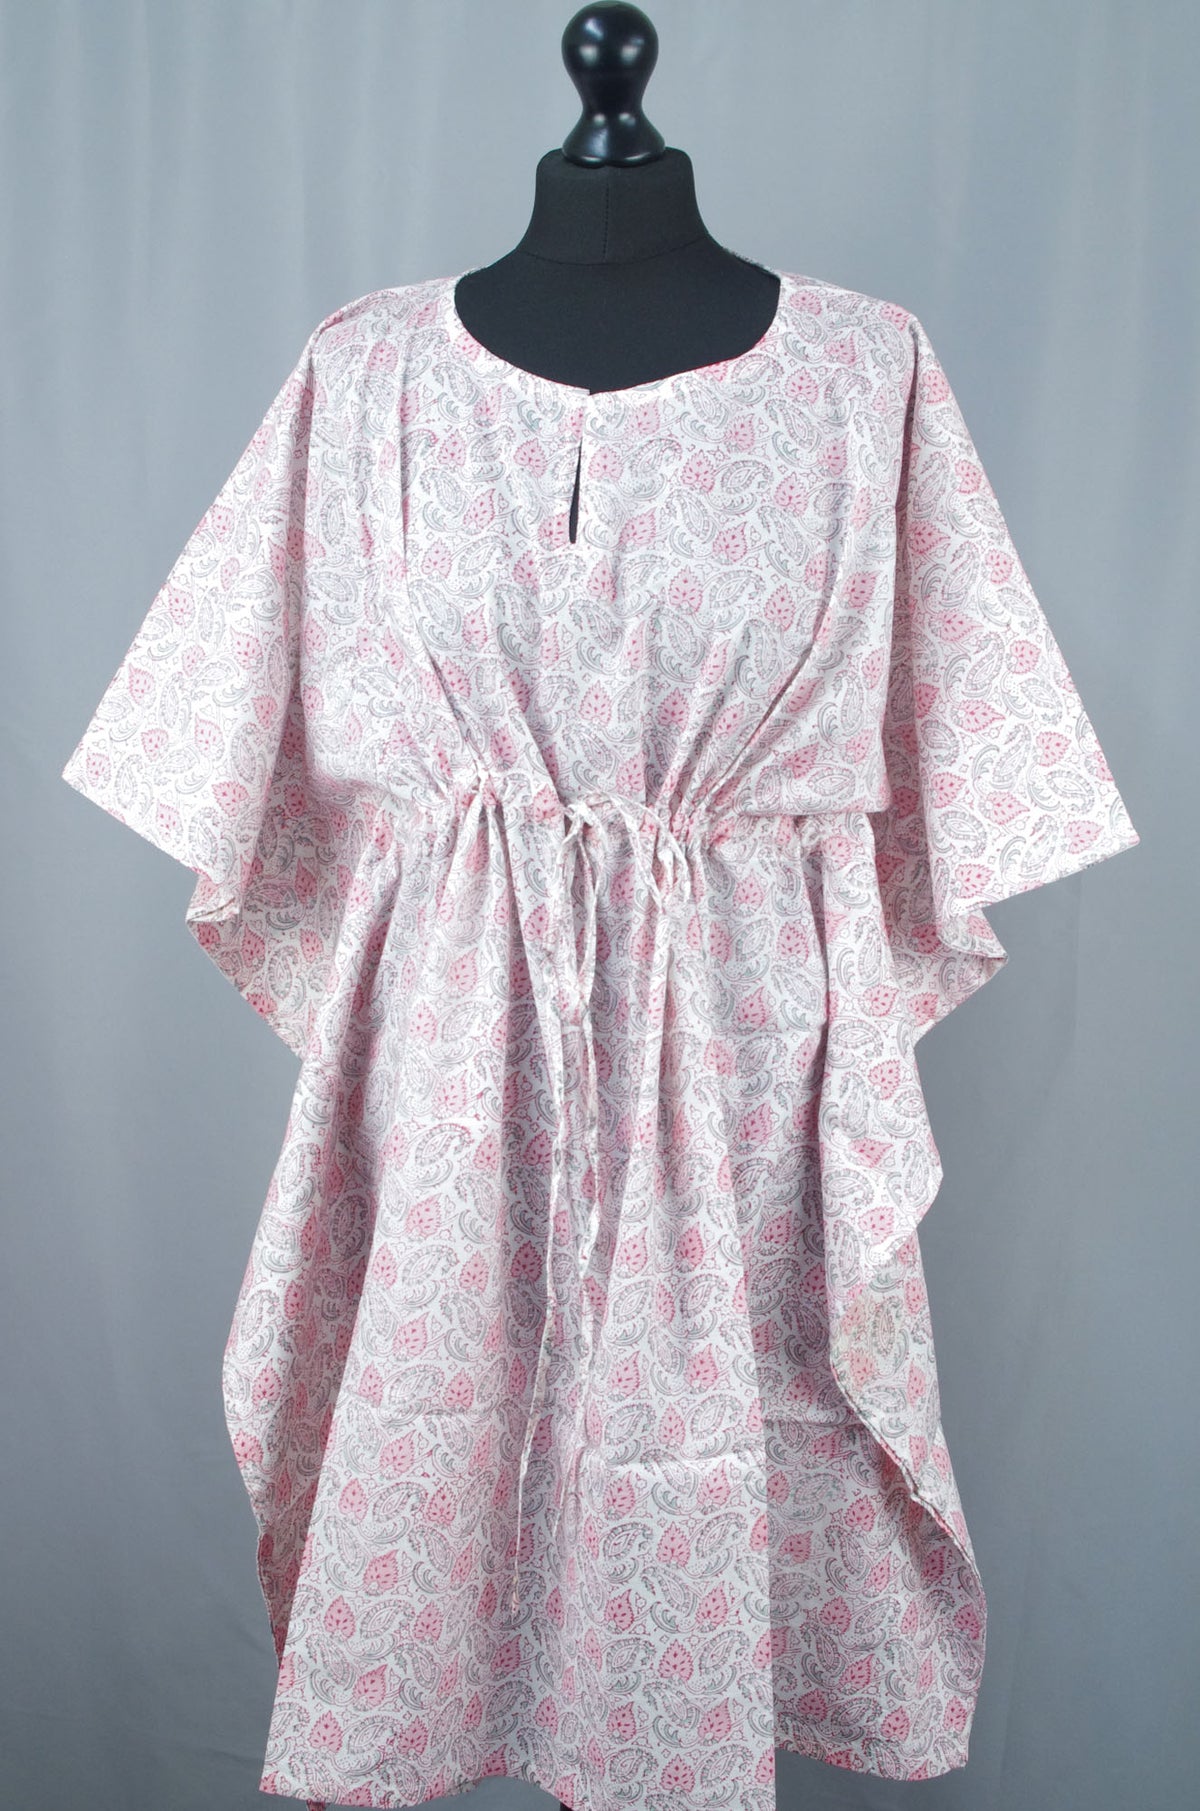 Block Printed Cotton Coverup / Kaftans - Pink Leaves